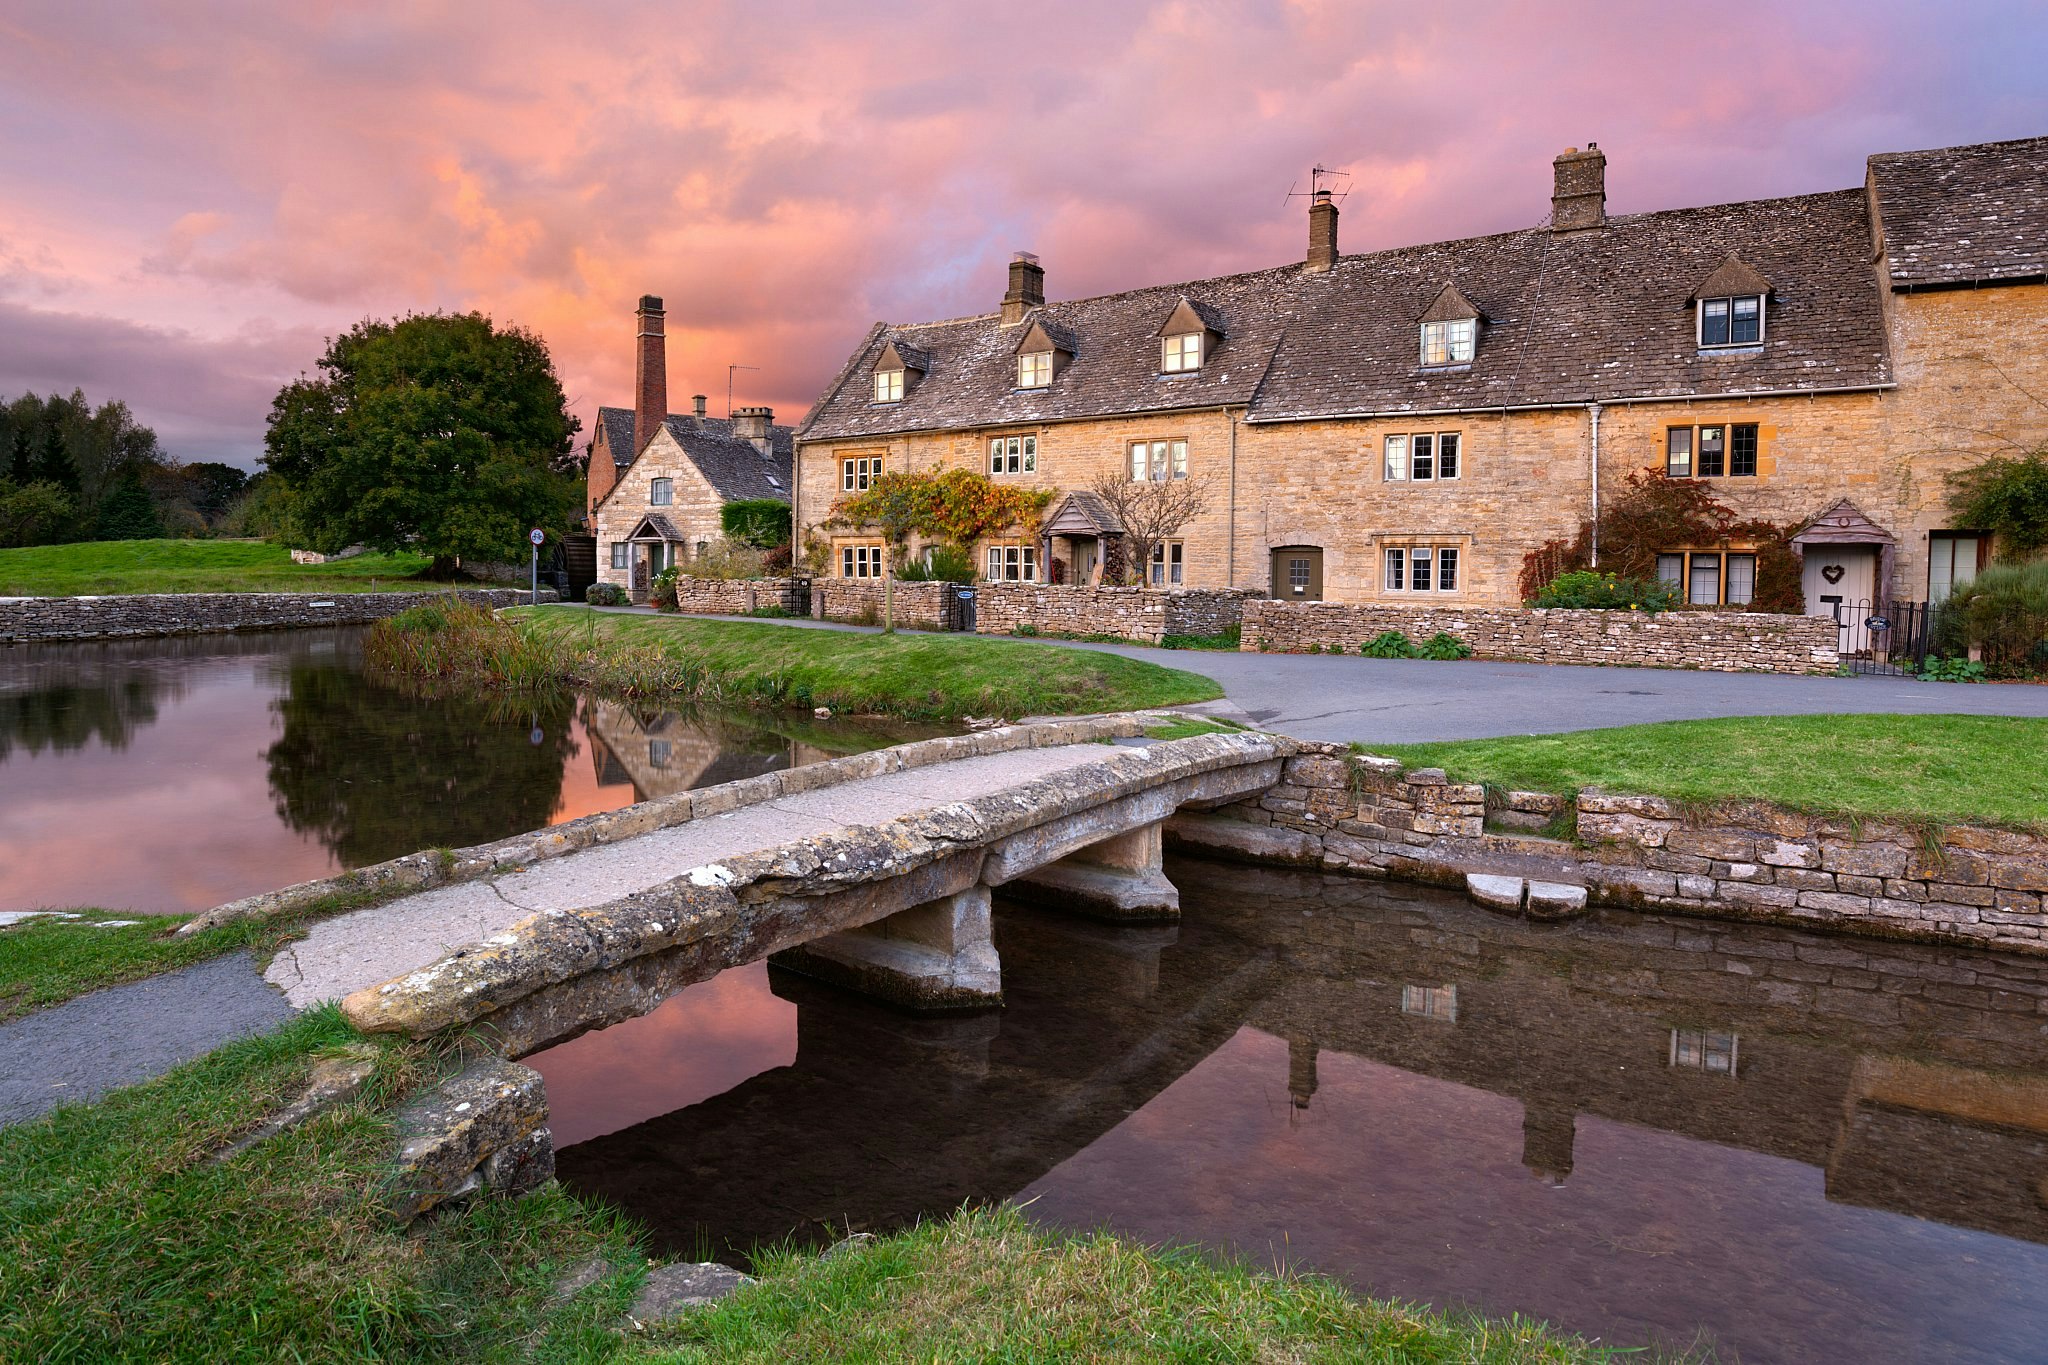 A small stone bridge crossing a river to a row of stone cottages at sunset.